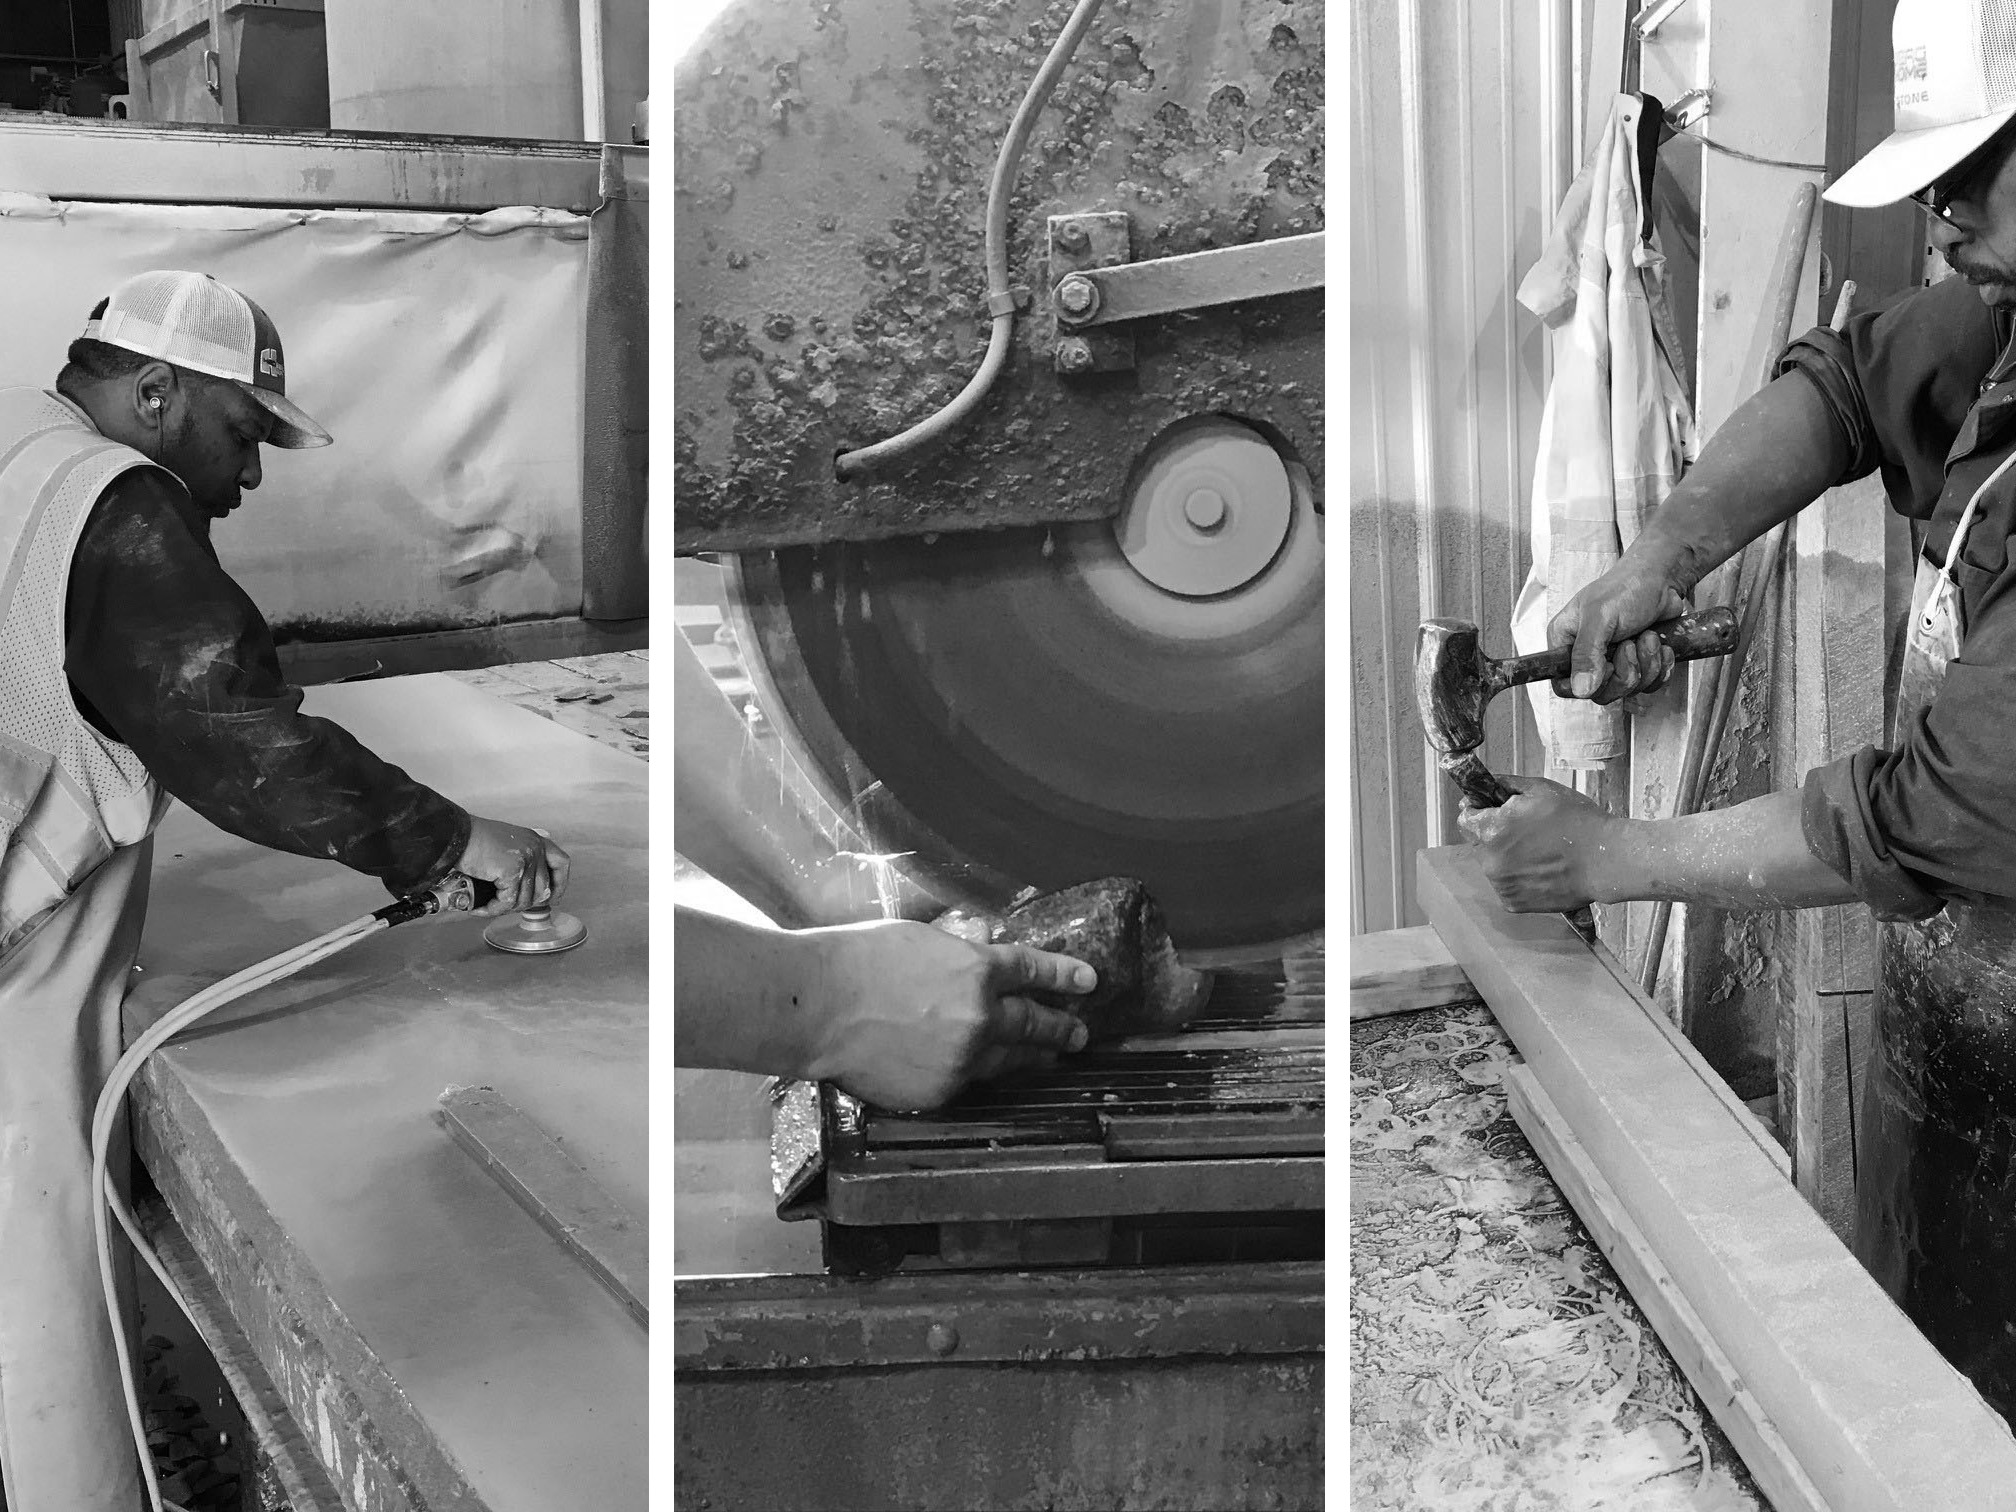 three black and white images of men fabricating natural stone with their hands and tools